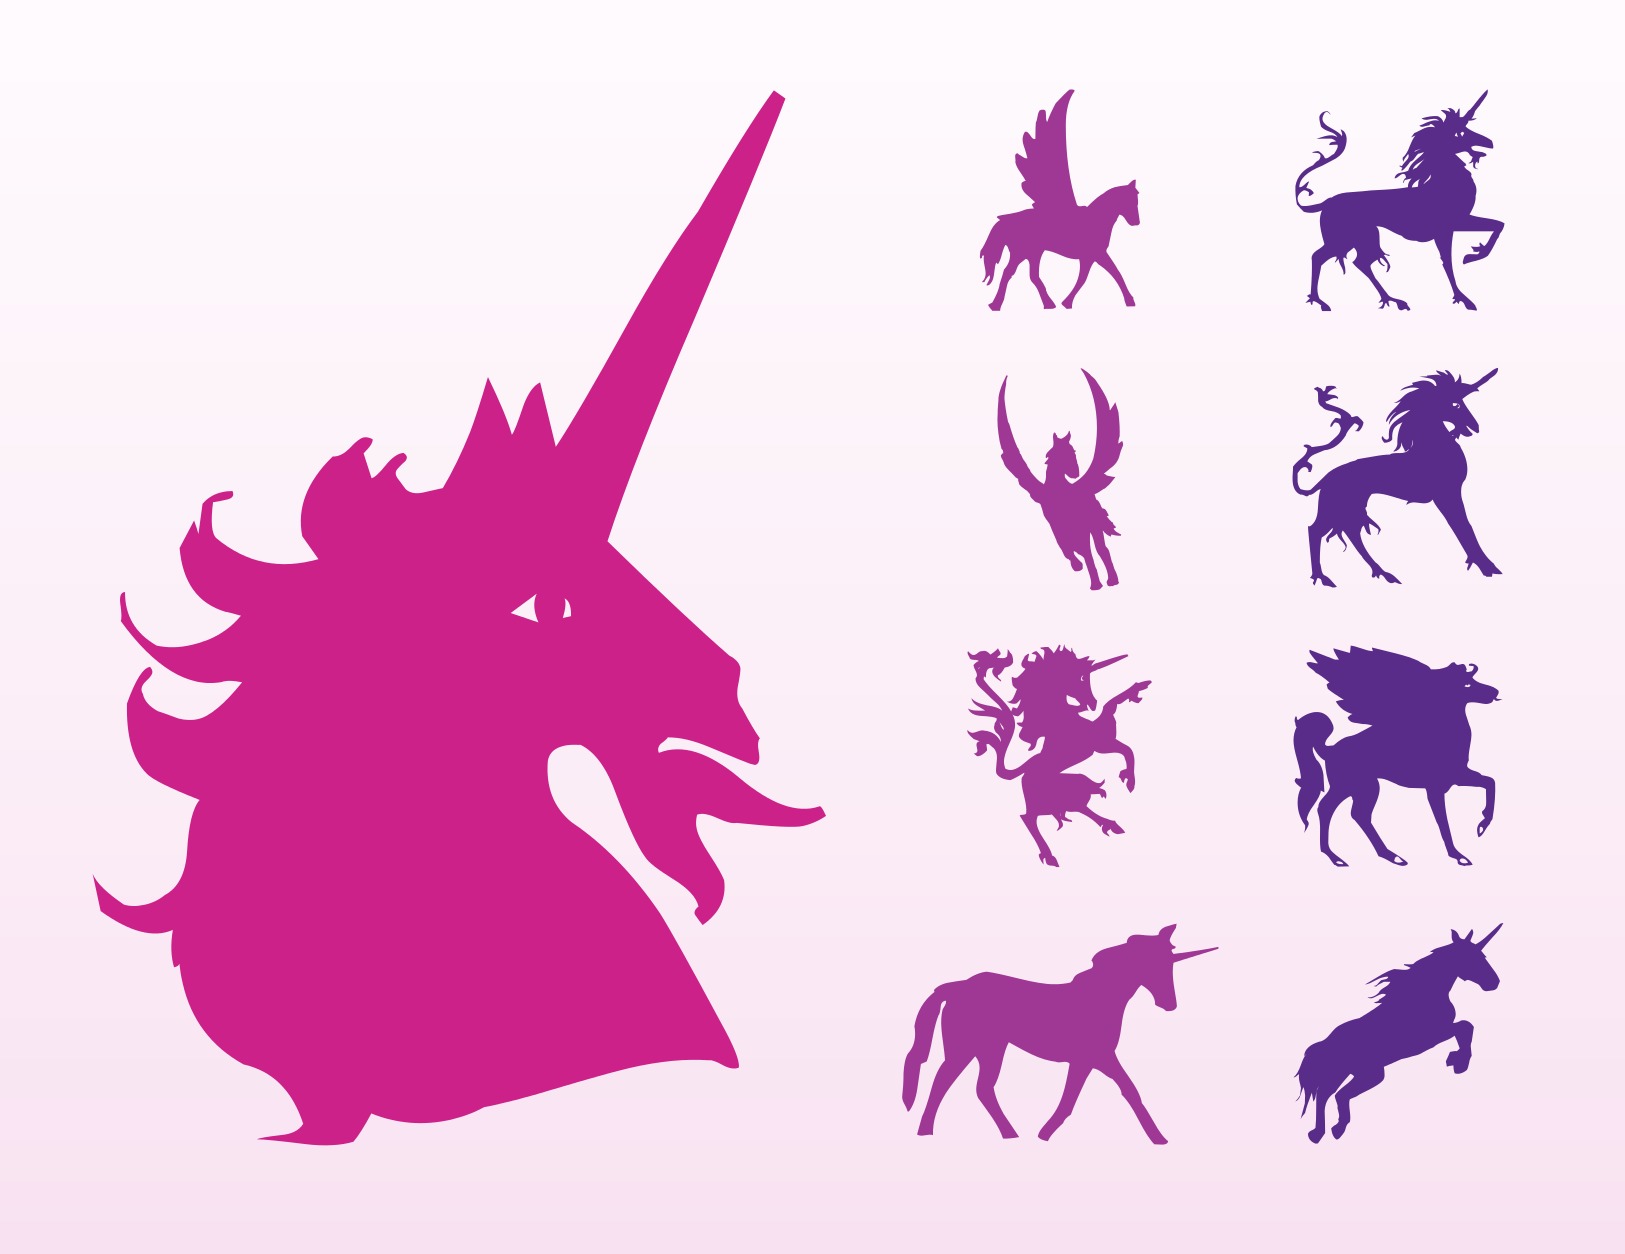 Download Unicorns And Horses Silhouettes - Download Free Vector Art, Stock Graphics & Images